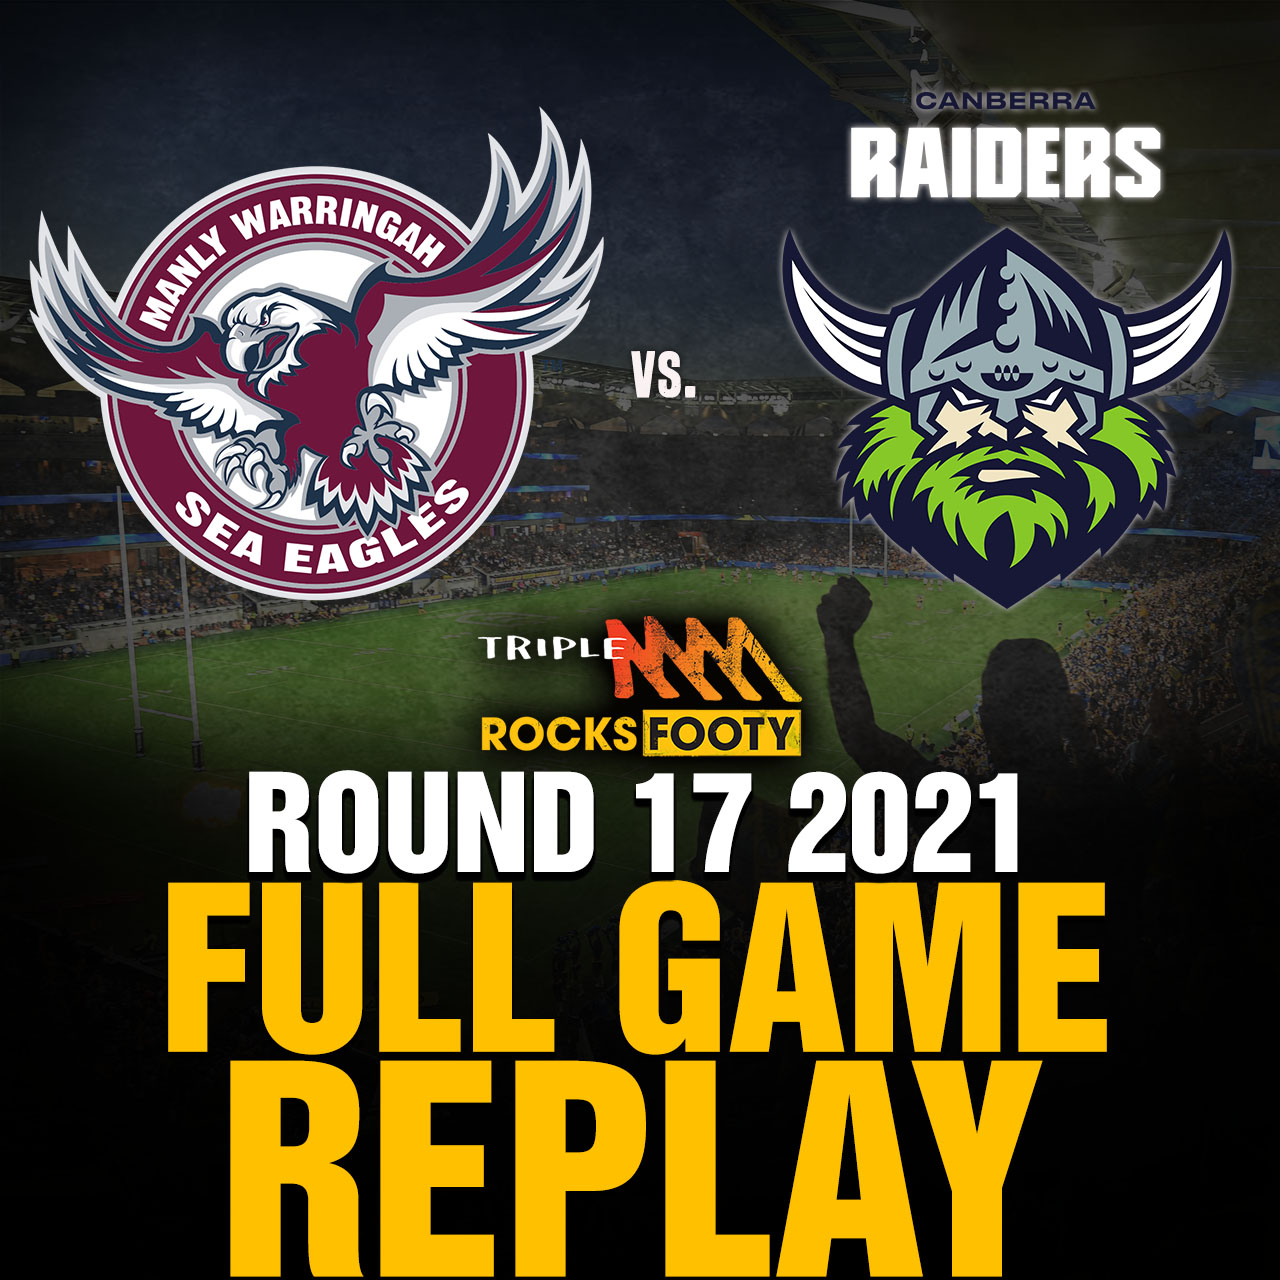 FULL GAME REPLAY | Manly Sea Eagles vs. Canberra Raiders